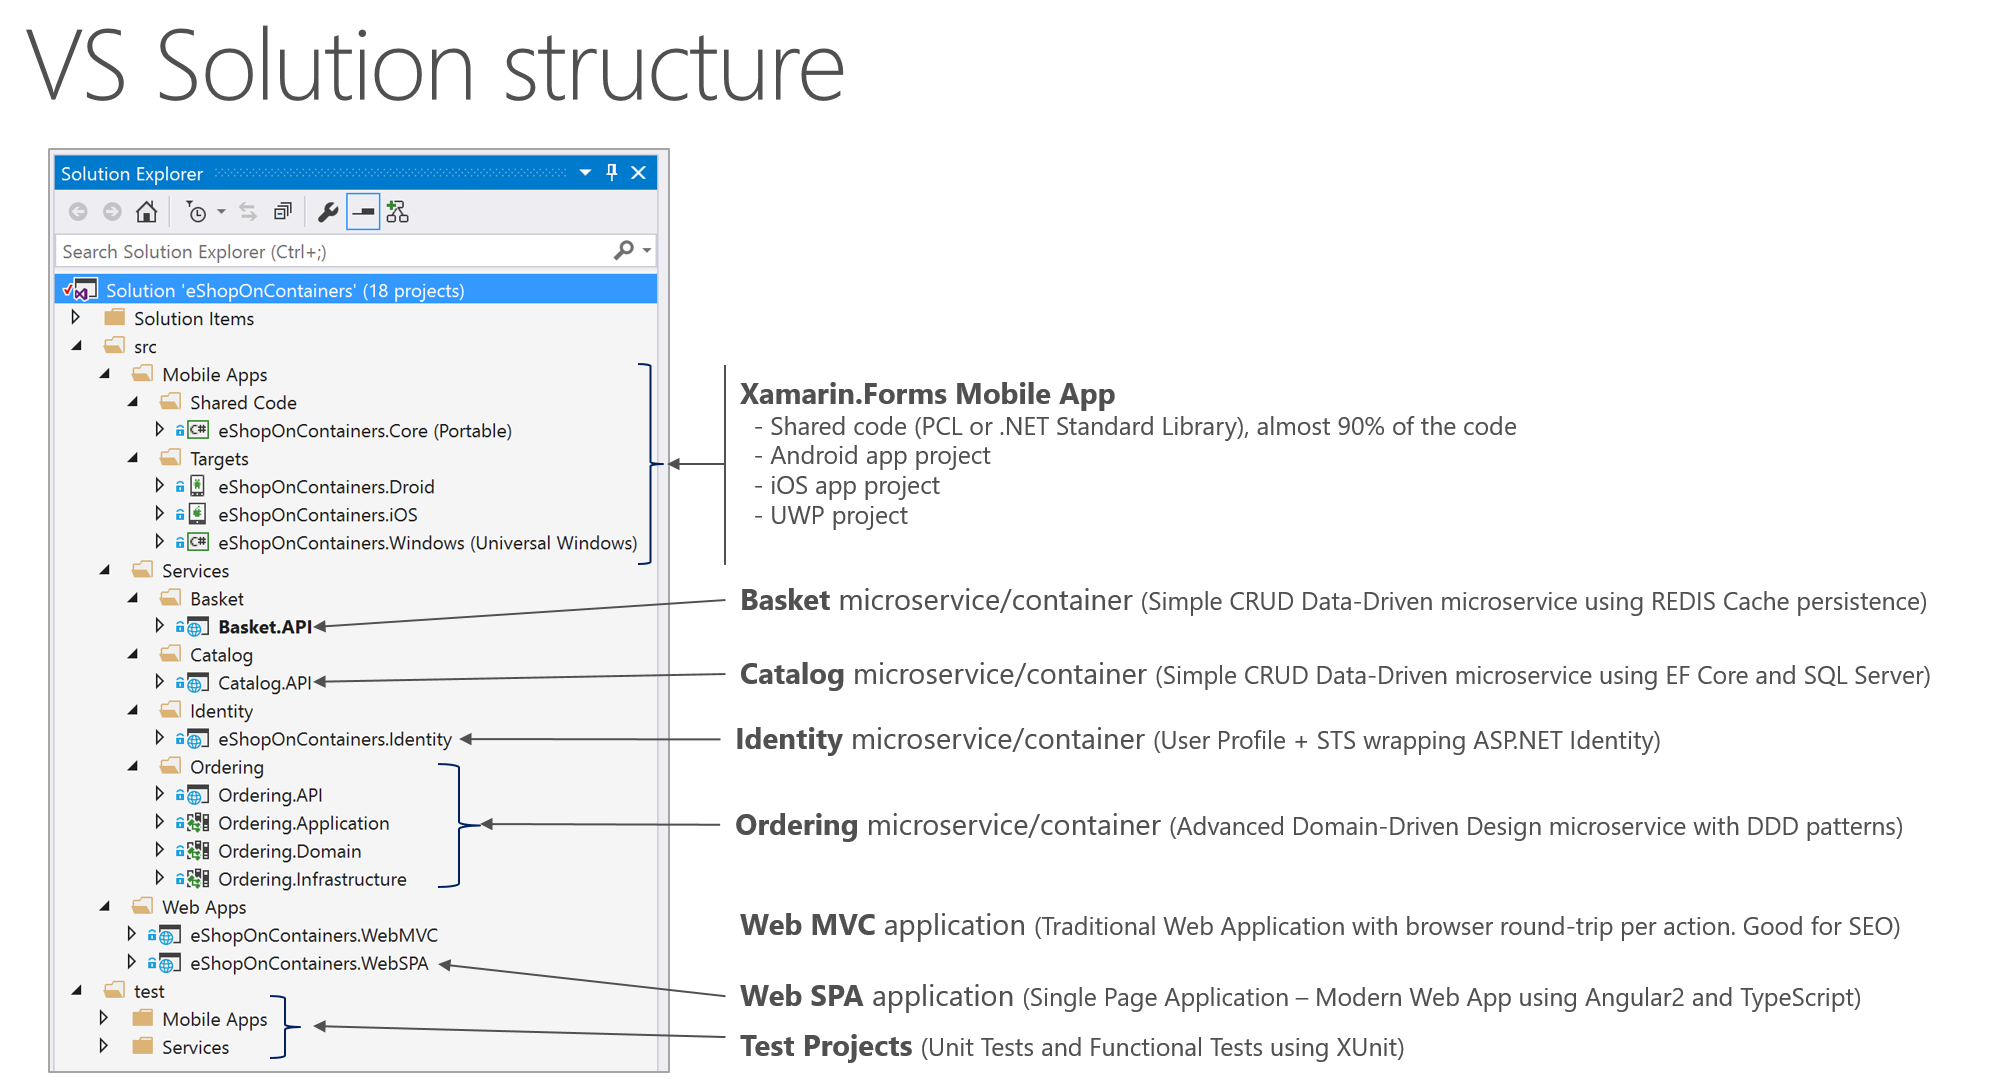 vs-solution-structure.png